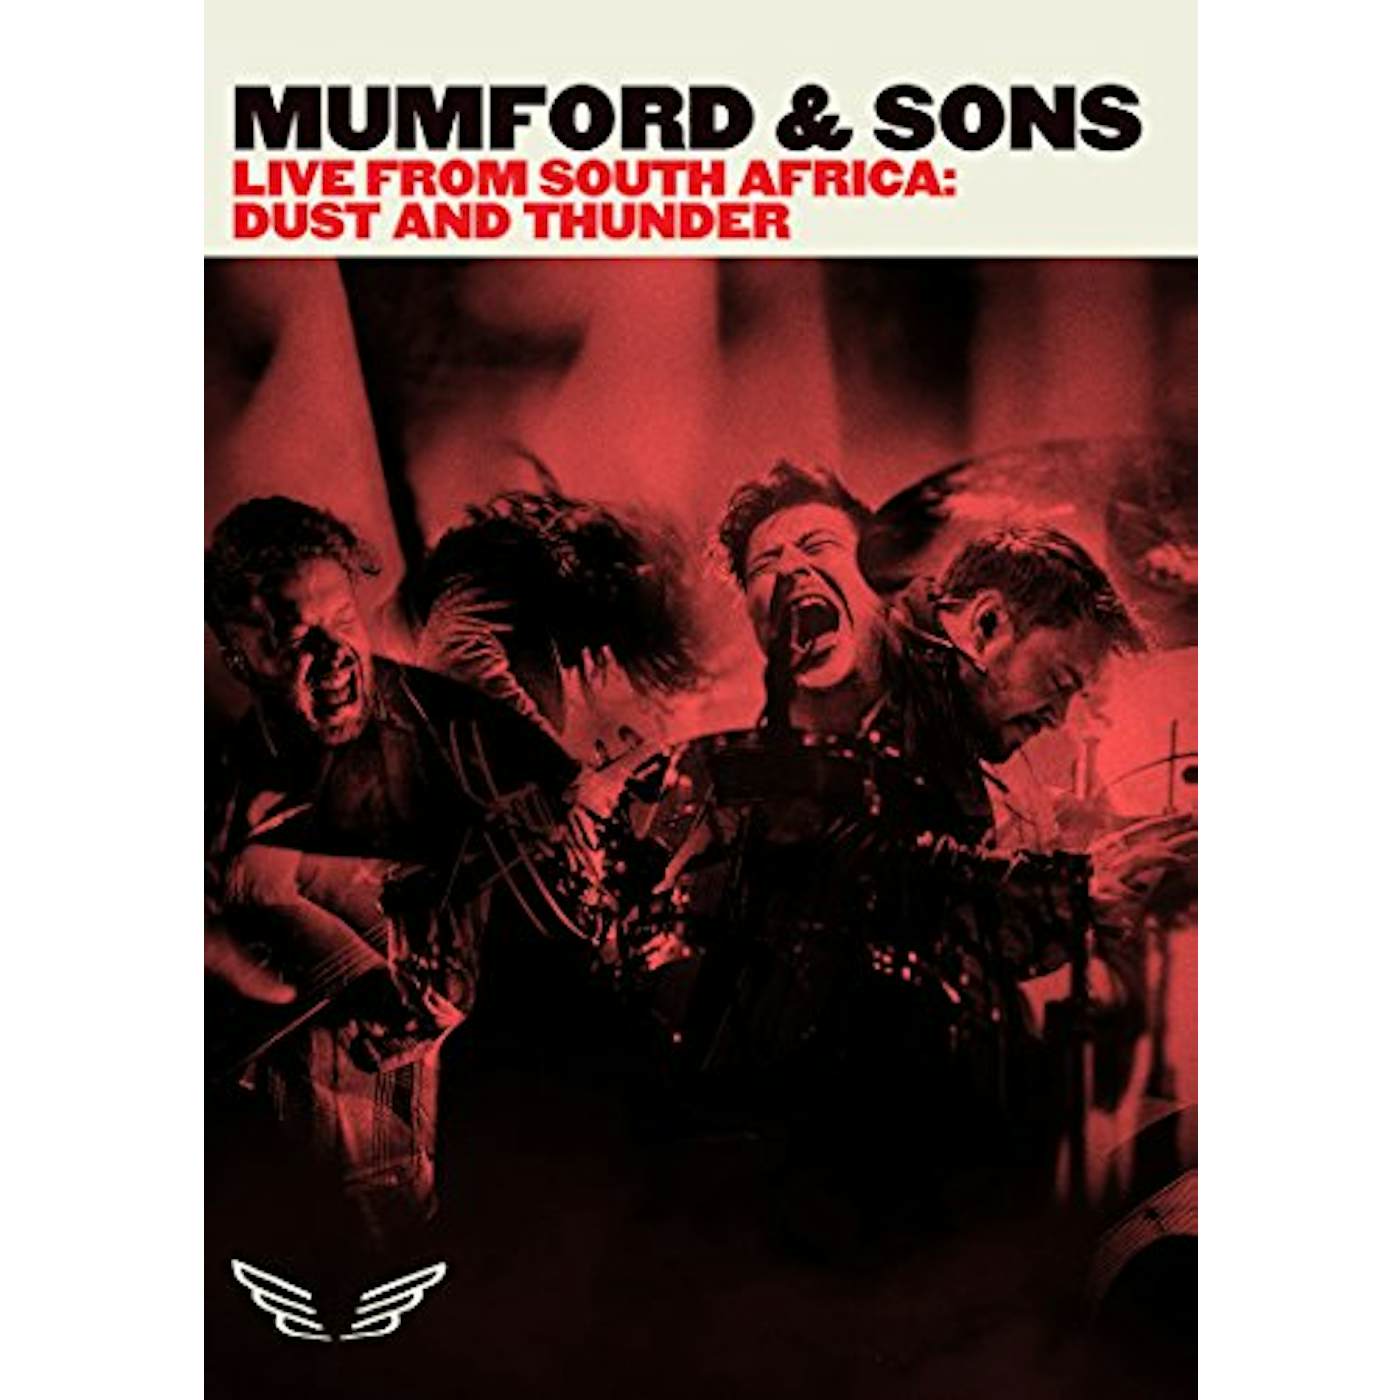 Mumford & Sons LIVE FROM SOUTH AFRICA: DUST & THUNDER DVD